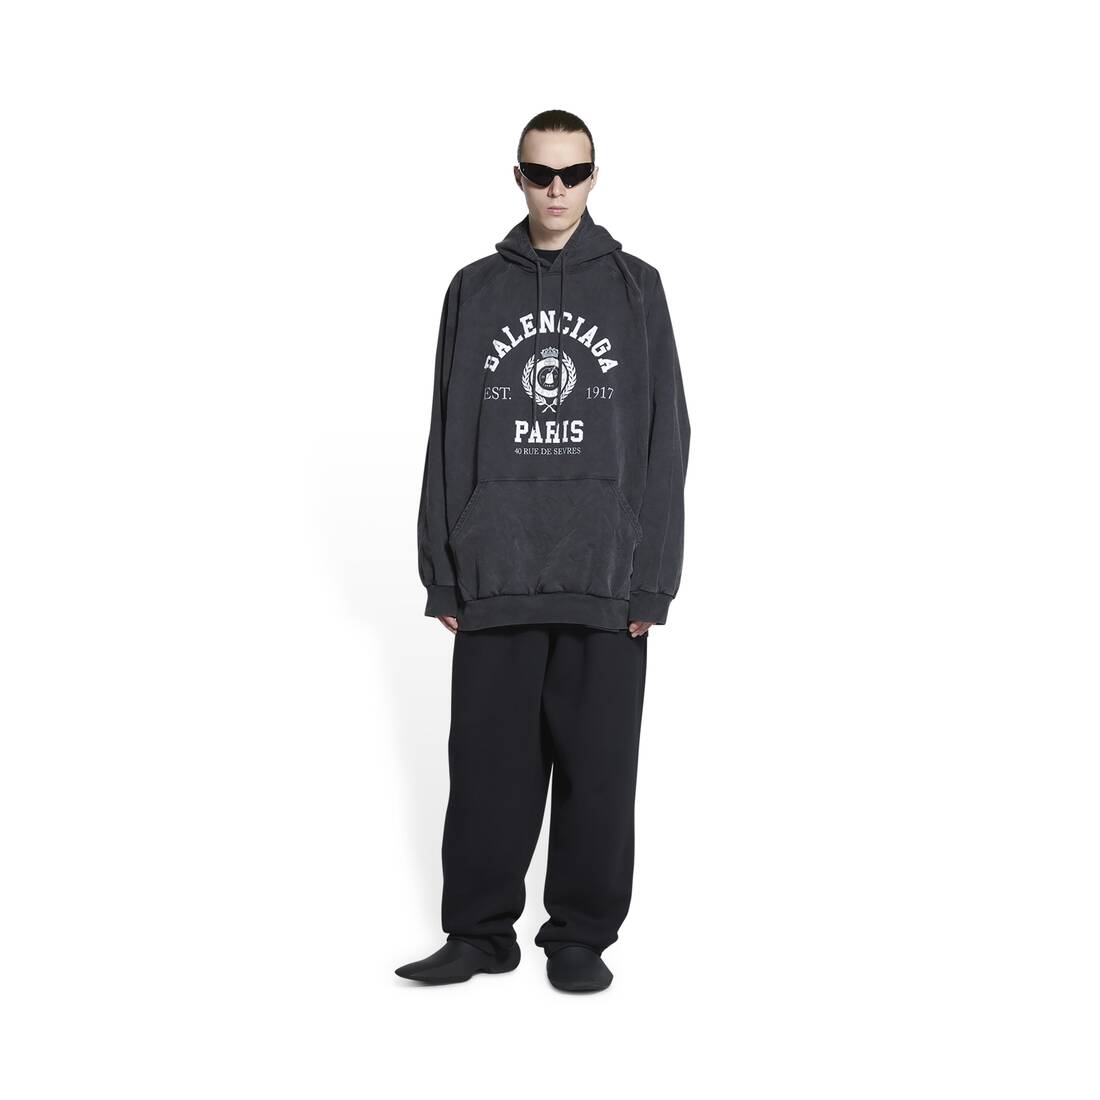 college 1917 hoodie oversized